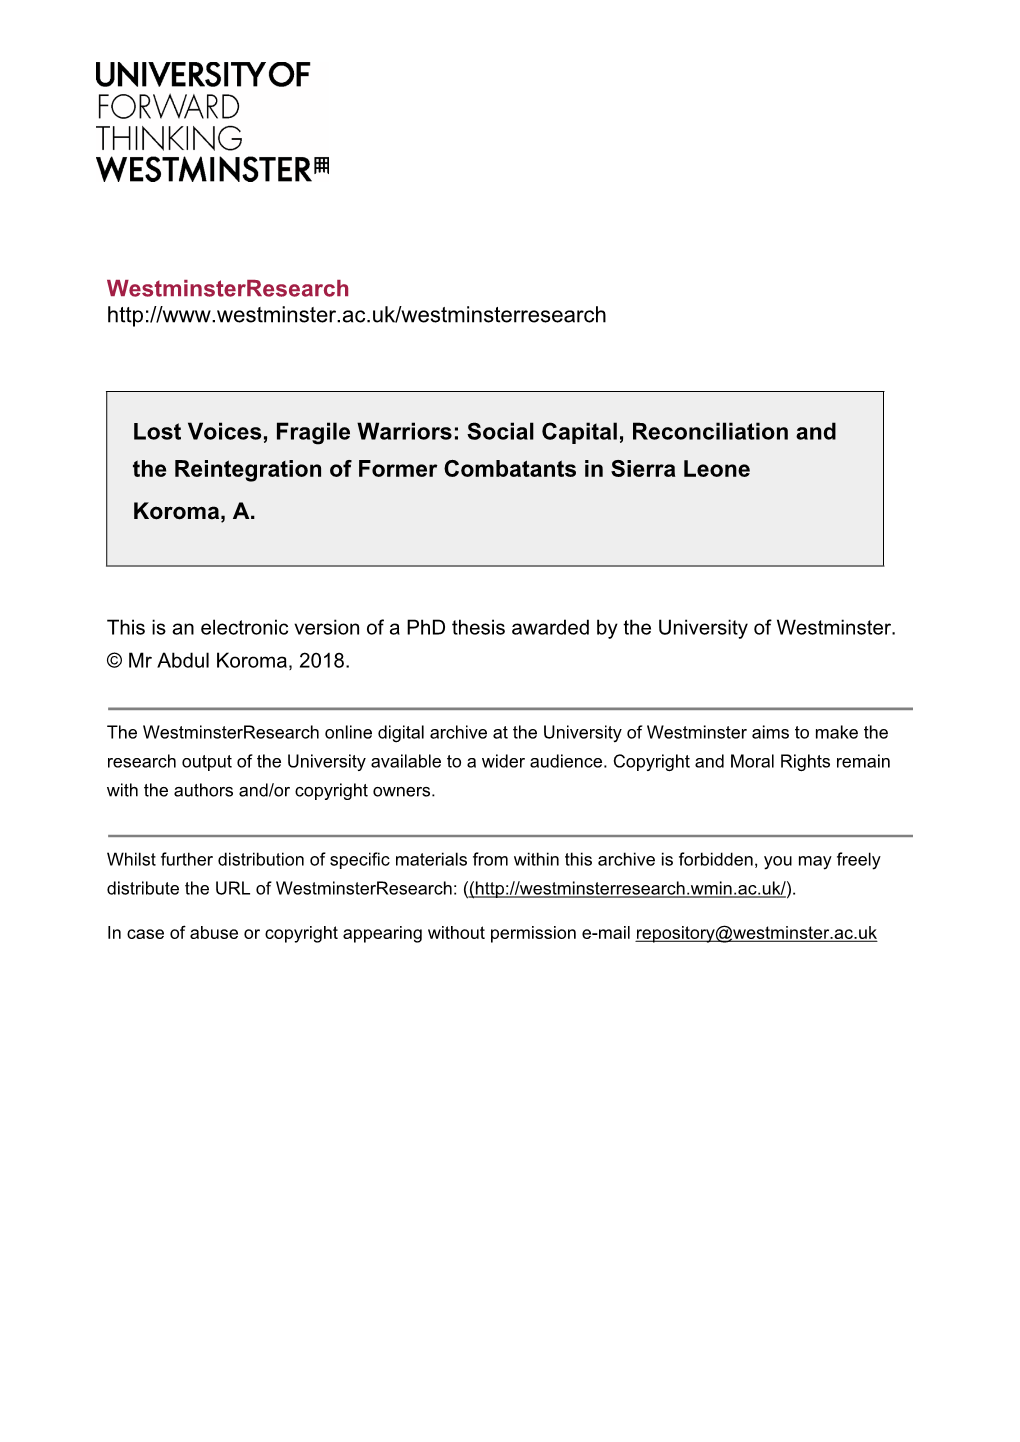 Social Capital, Reconciliation and the Reintegration of Former Combatants in Sierra Leone Koroma, A